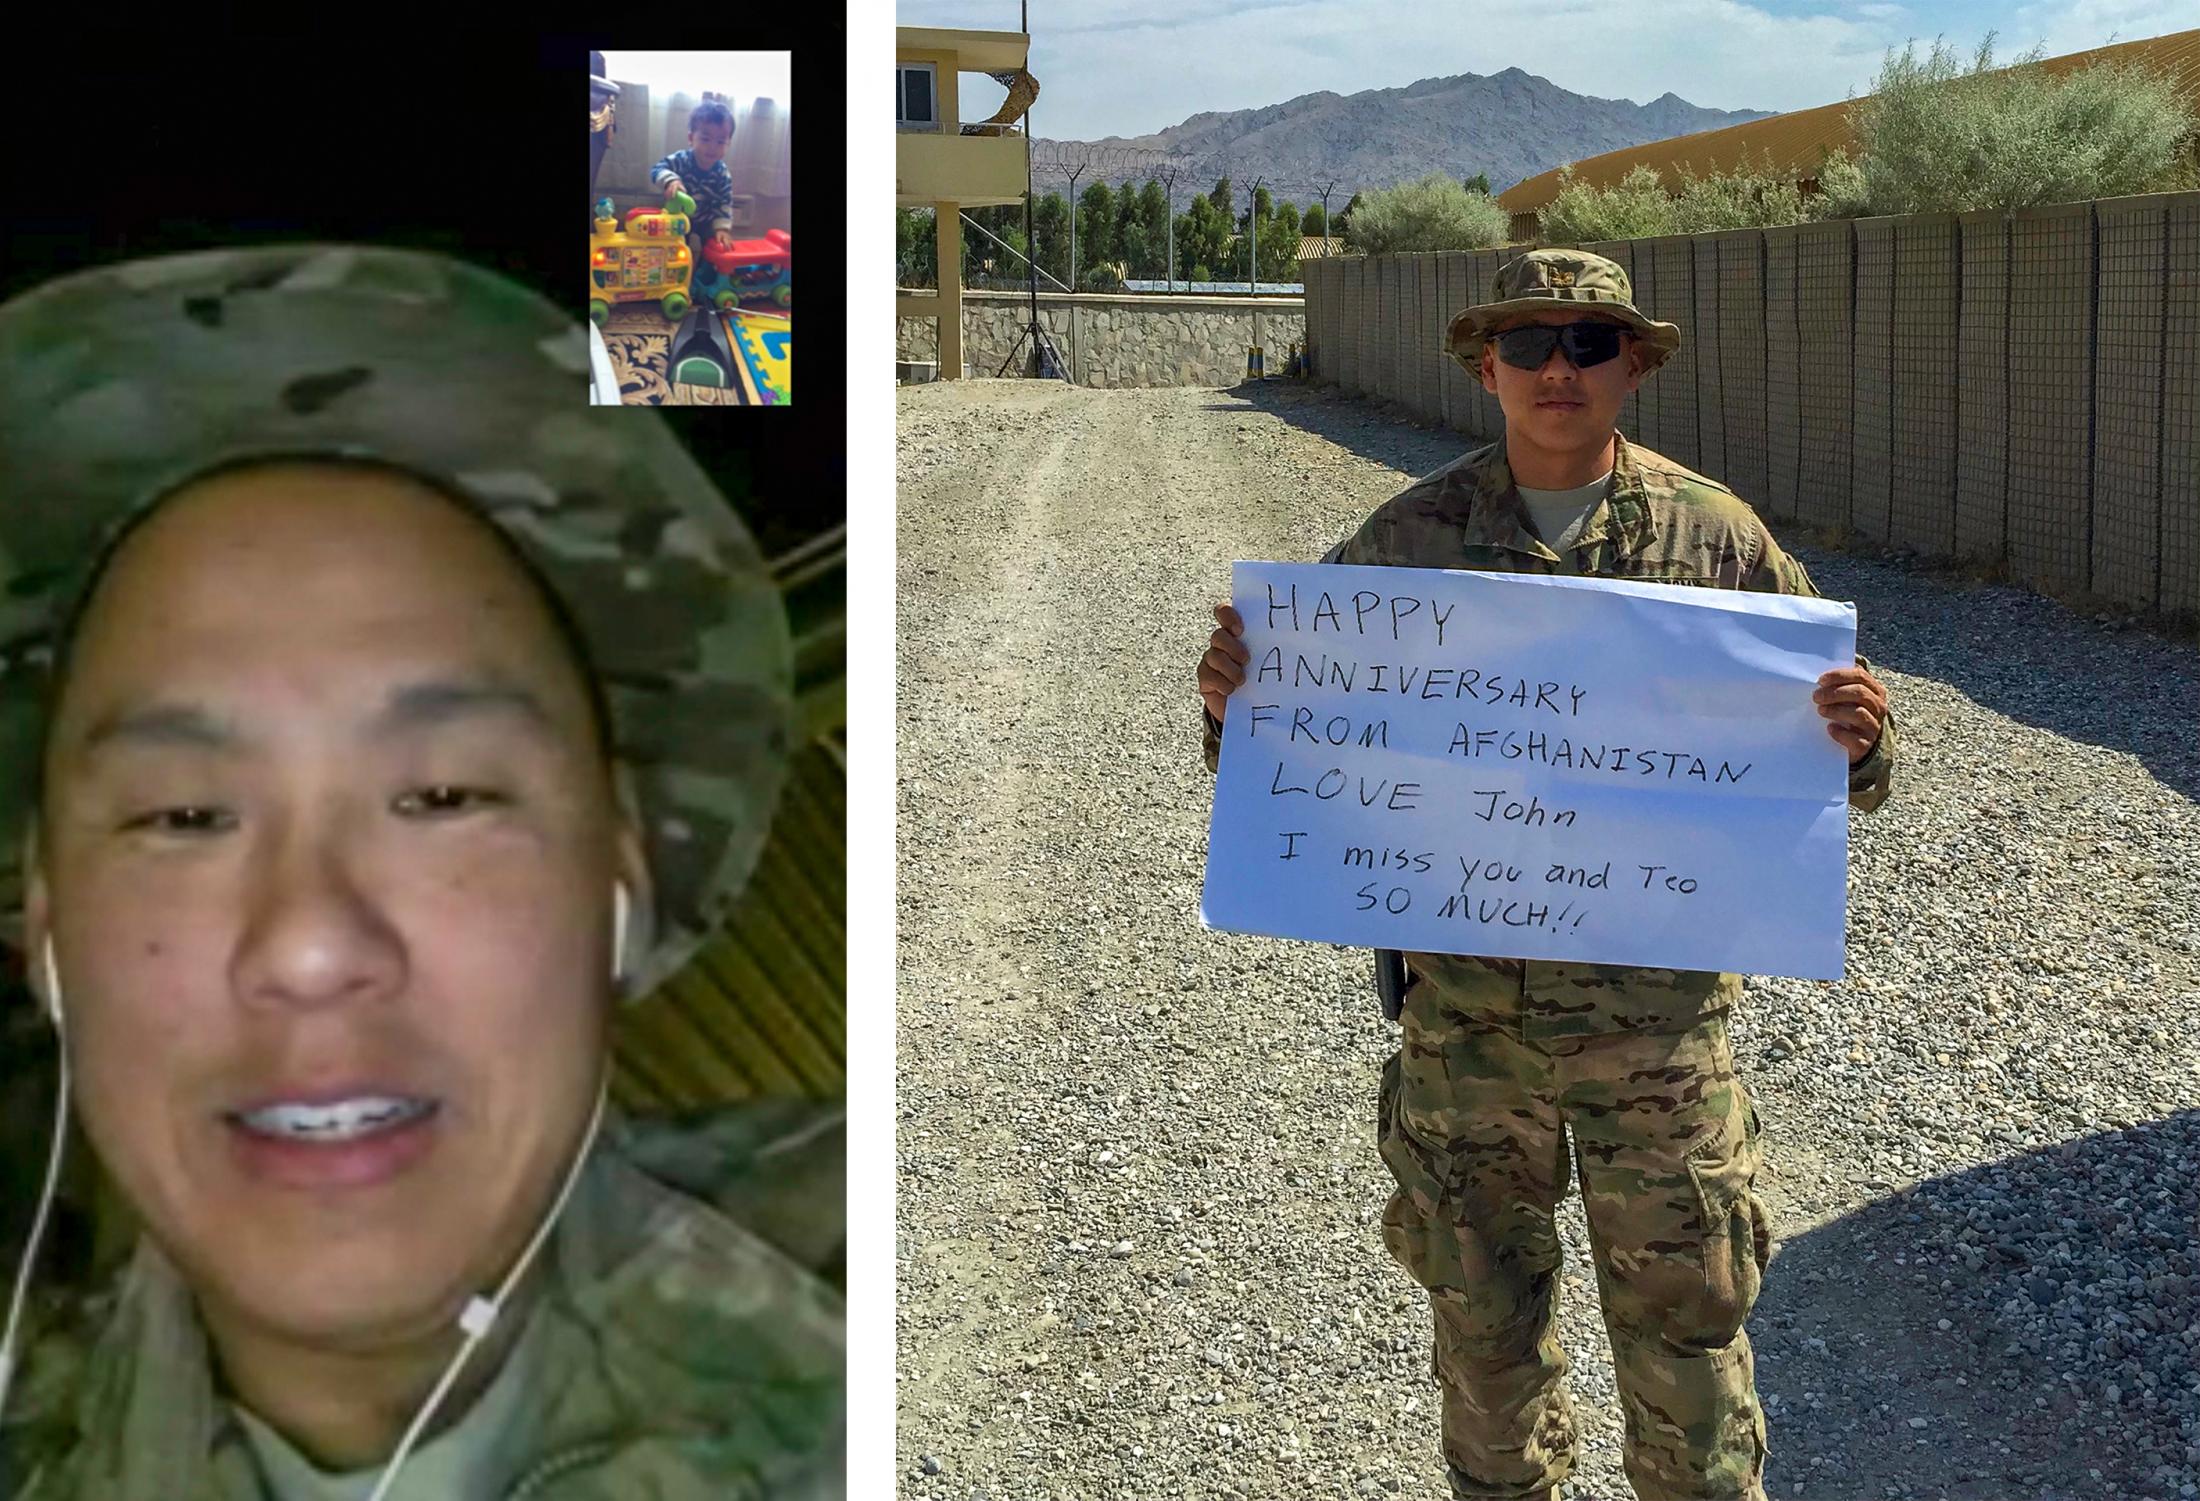 Happy Anniversary from Afghanistan - LEFT: Months after John deployed again in 2015, he...